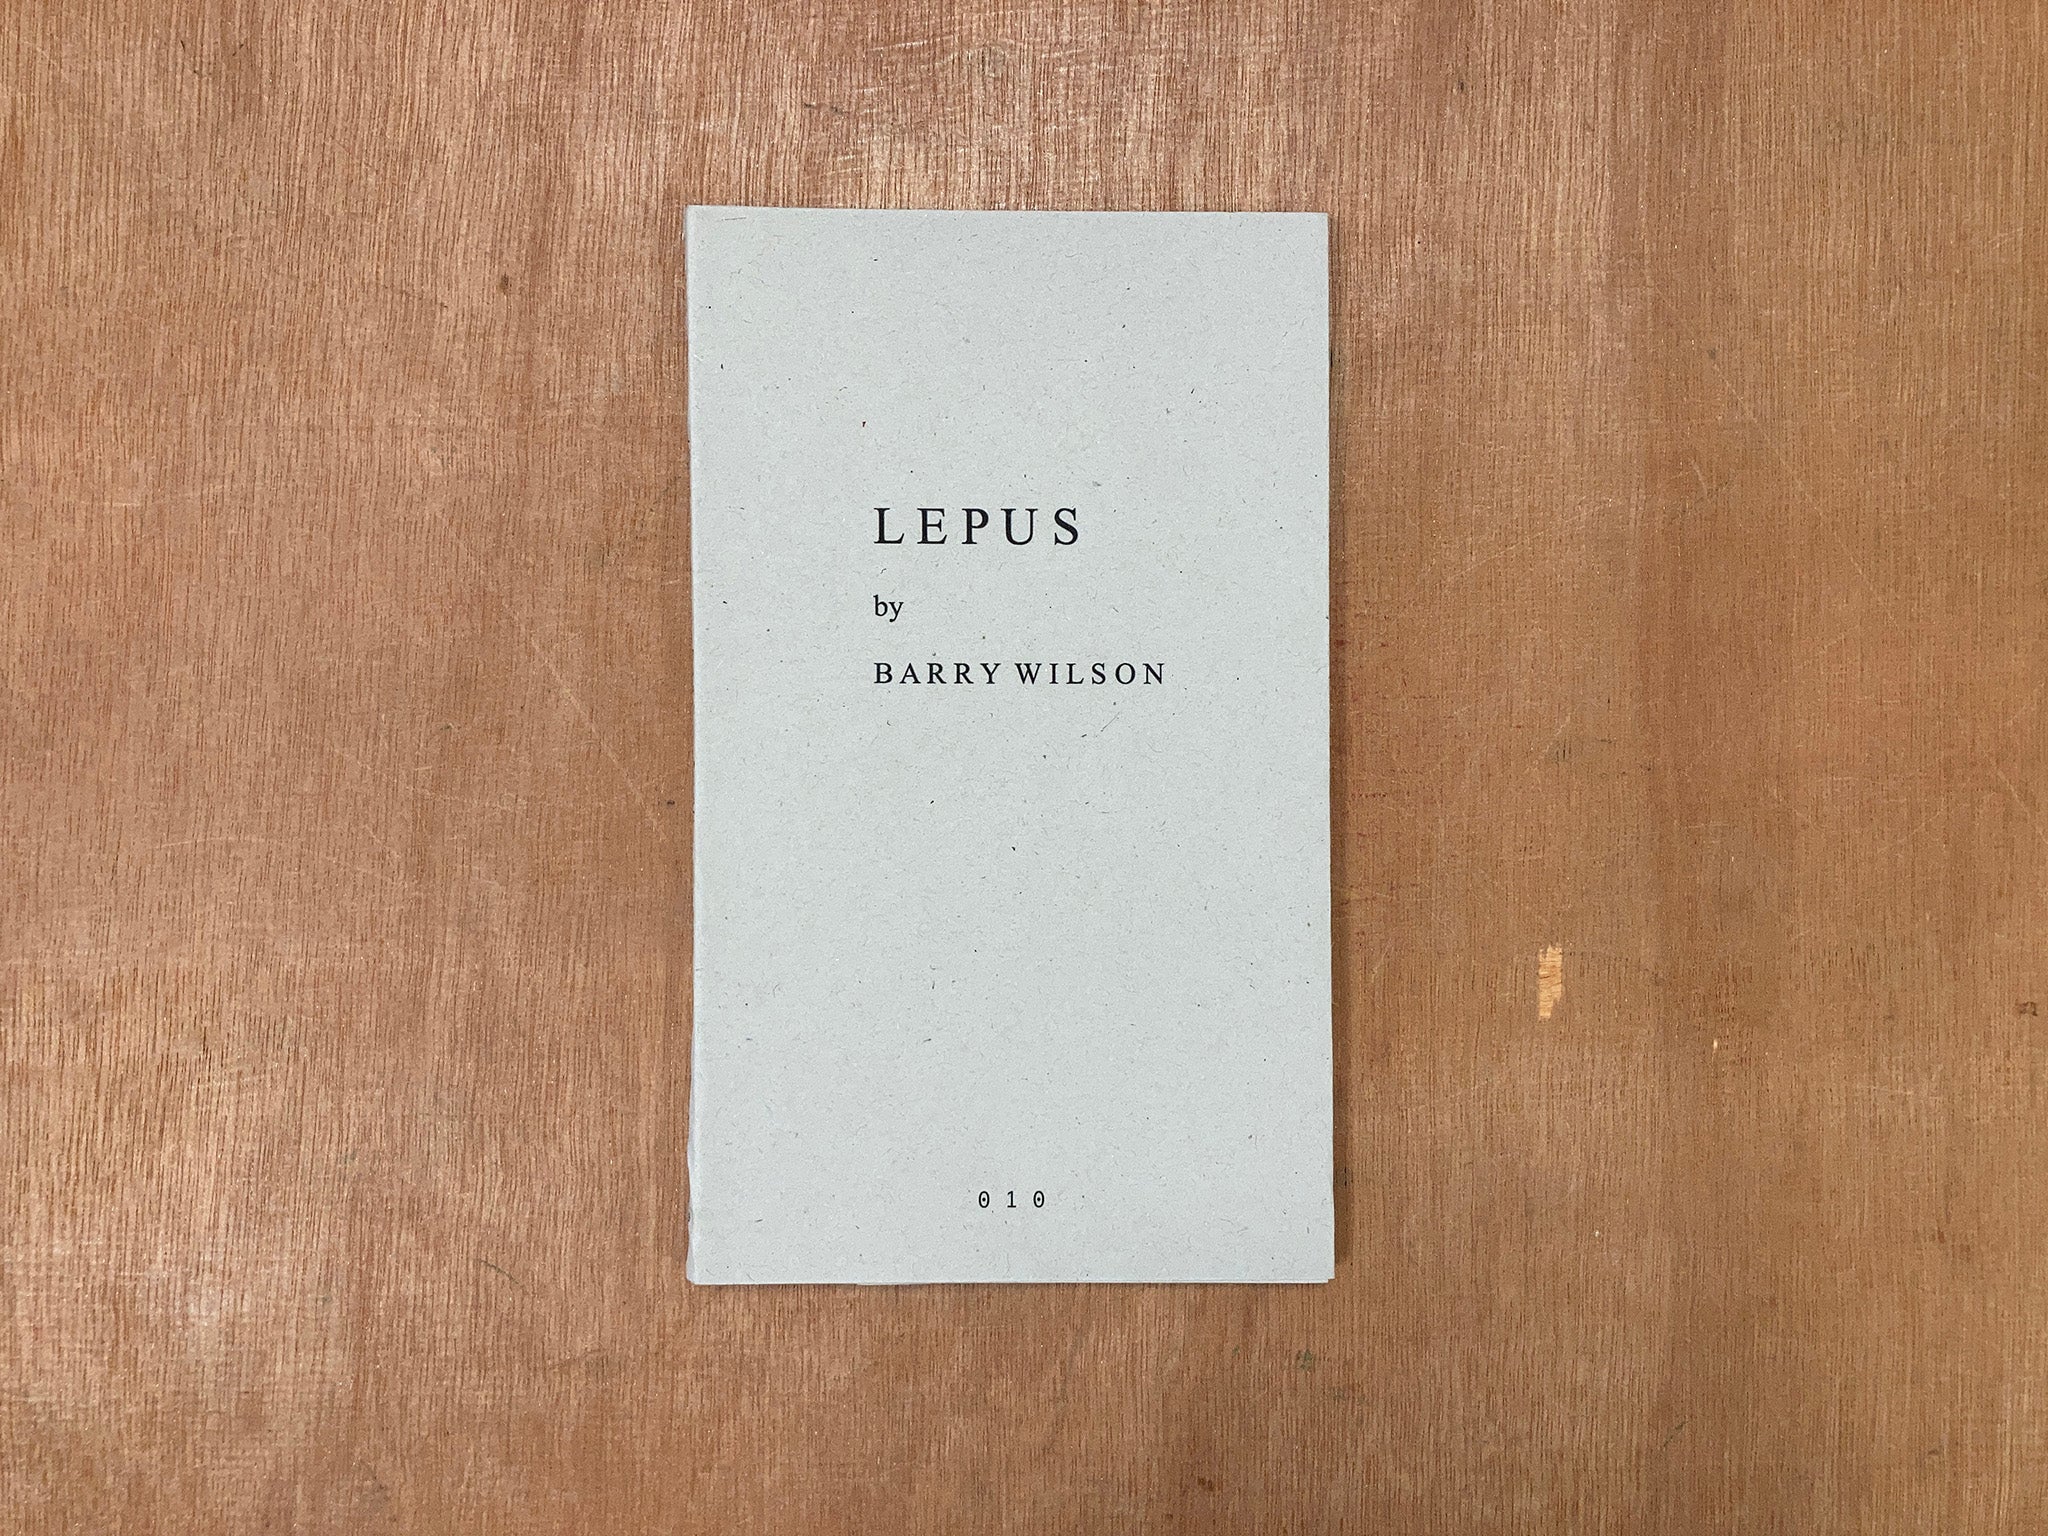 LEPUS by Barry Wilson